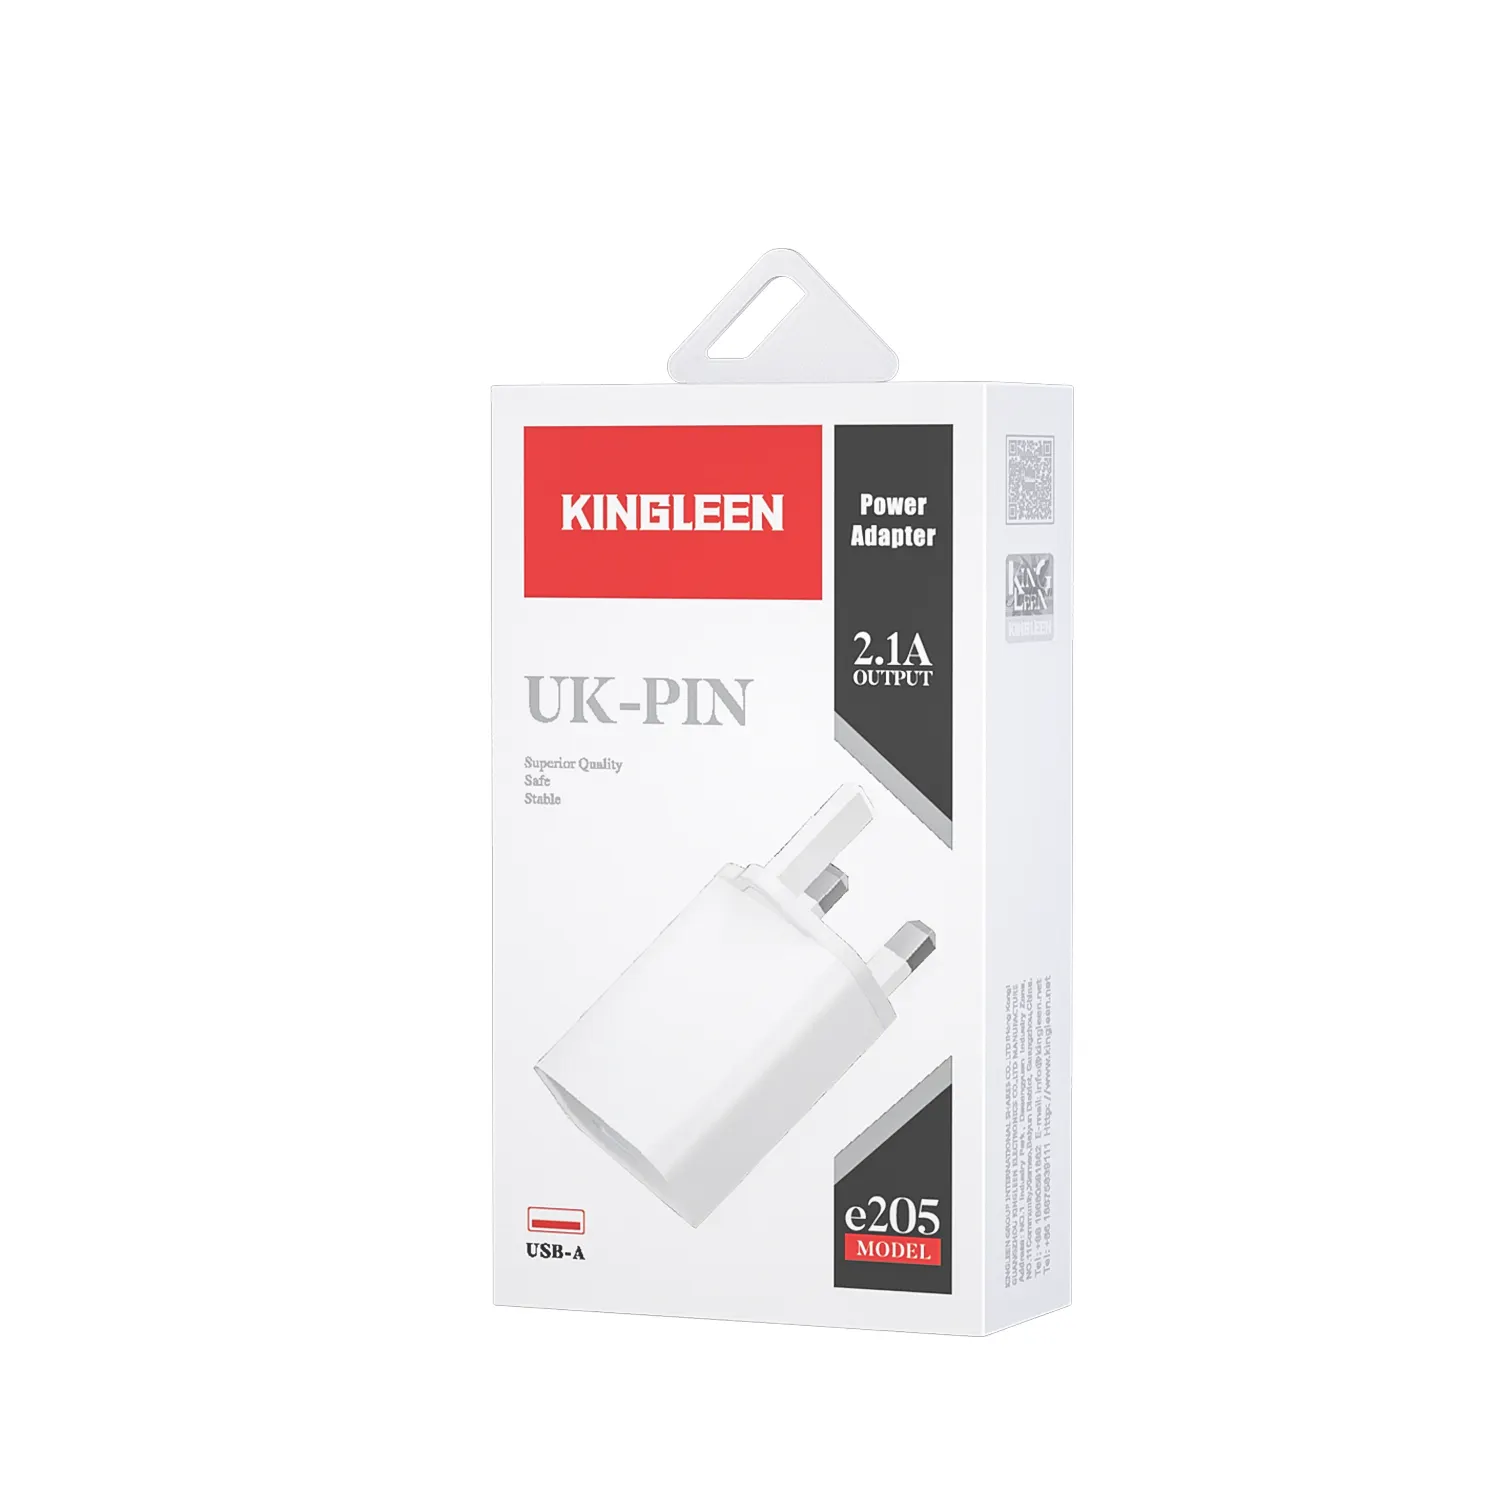 KINGLEEN Factory 5V2.1A Usb charger adapter 10w uk plug wall charger for Phone Factory direct sales